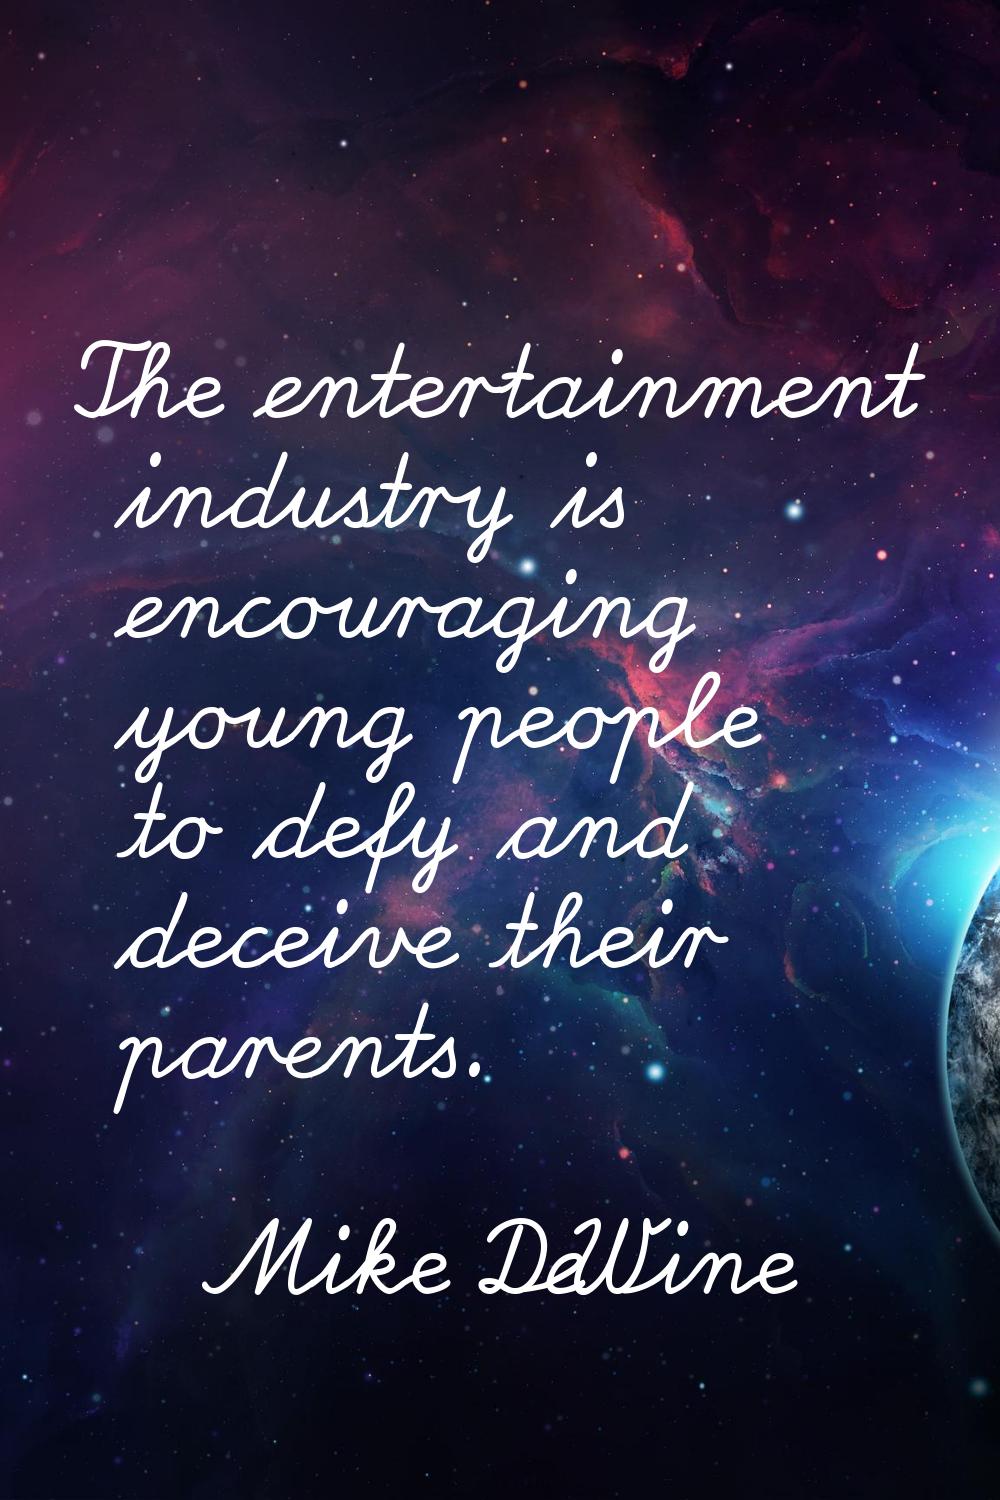 The entertainment industry is encouraging young people to defy and deceive their parents.